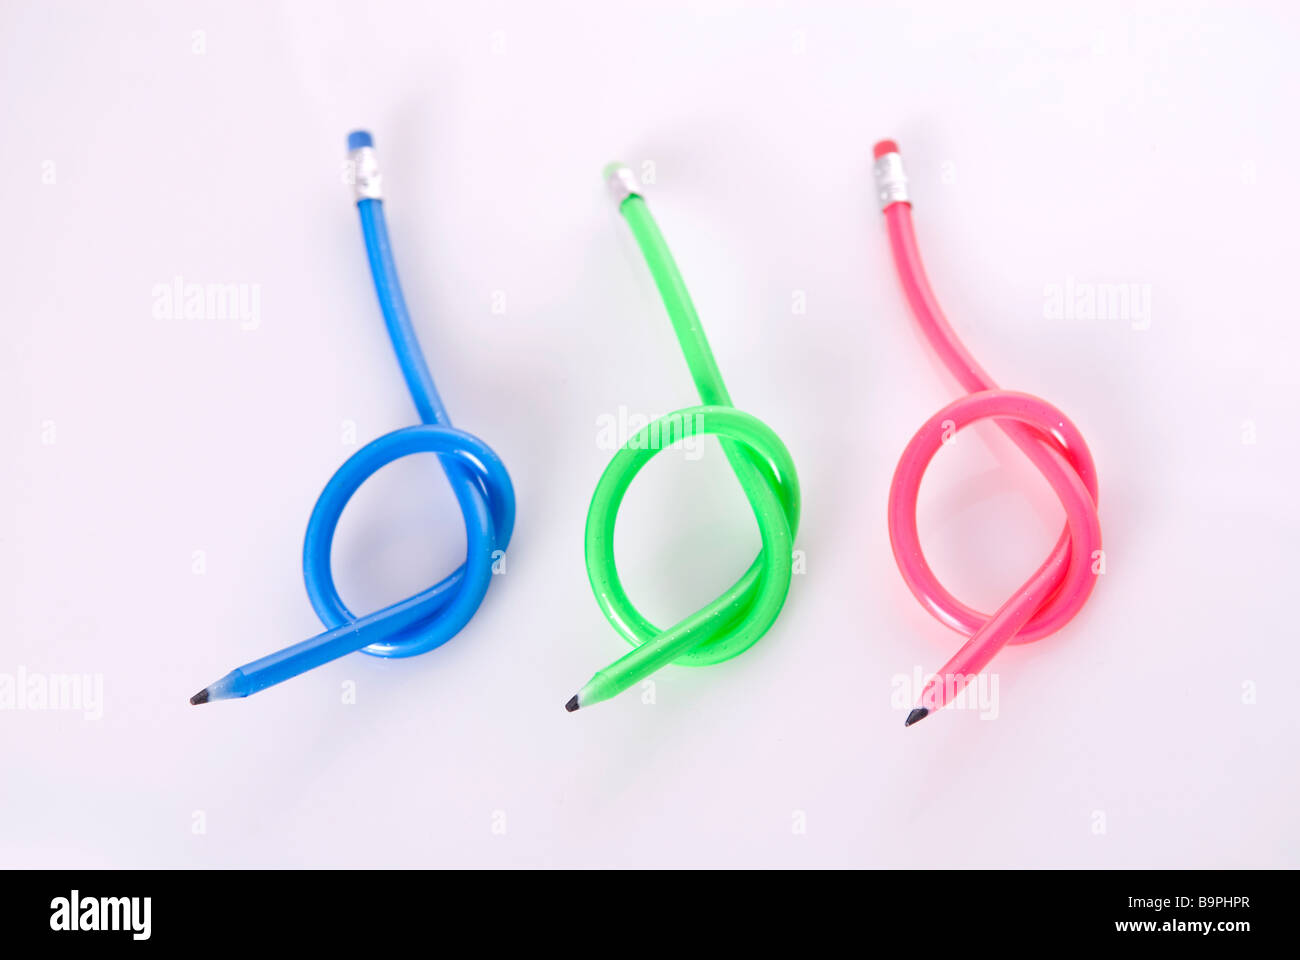 Flexible Pencil On A Turquoise Notebook Bent Pencils Twocolor Stock Photo -  Download Image Now - iStock